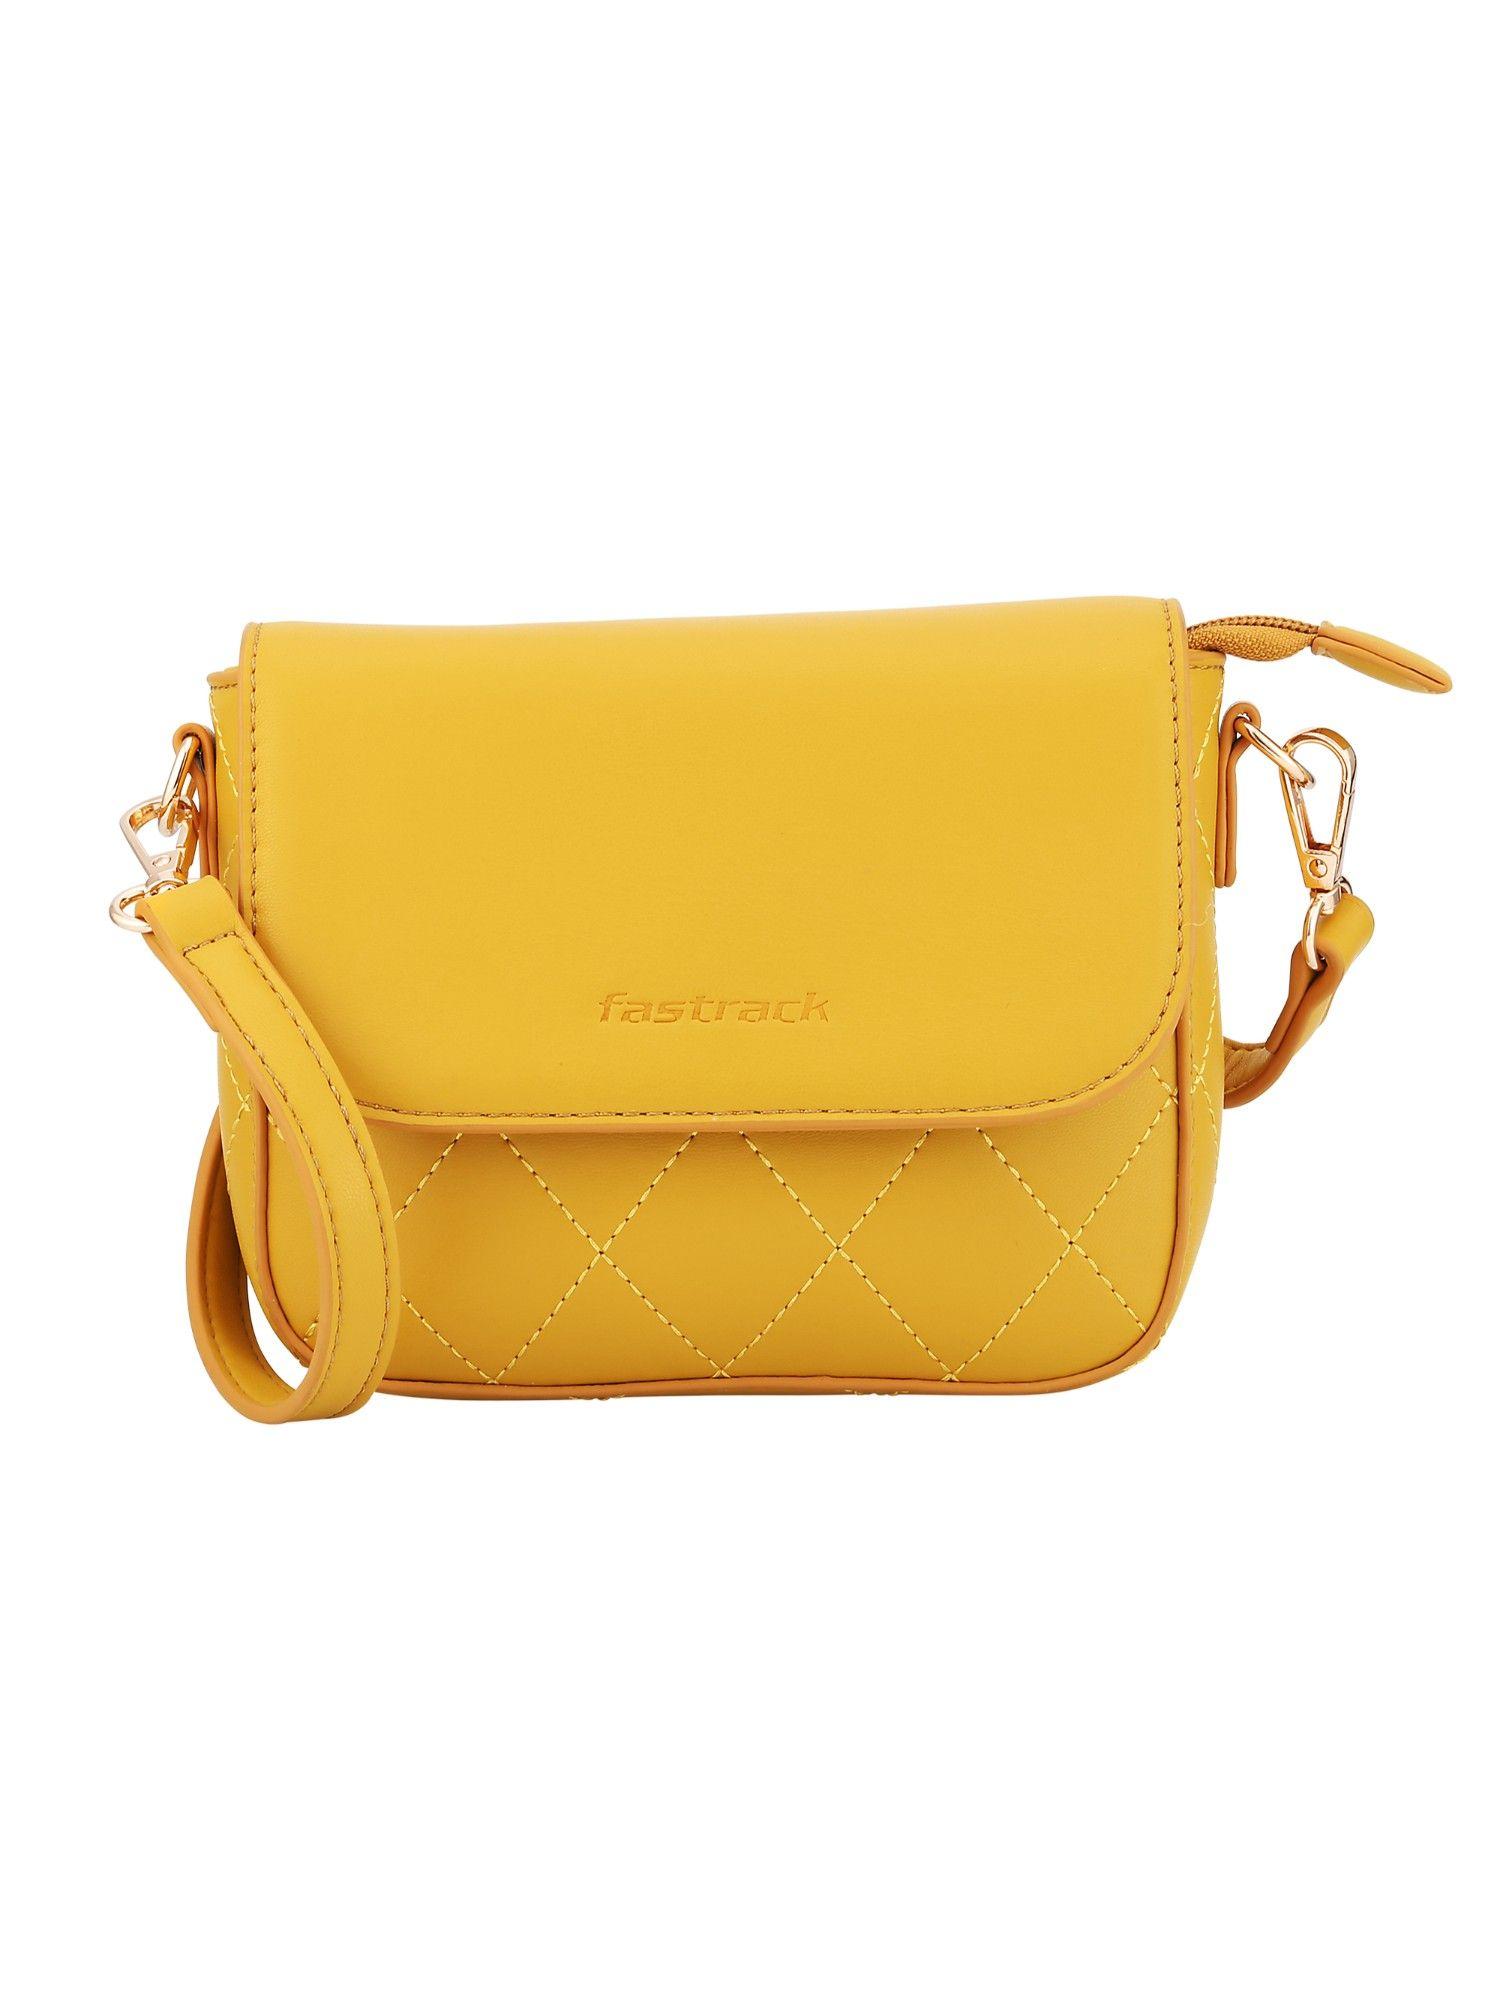 yellow structured sling bag for women